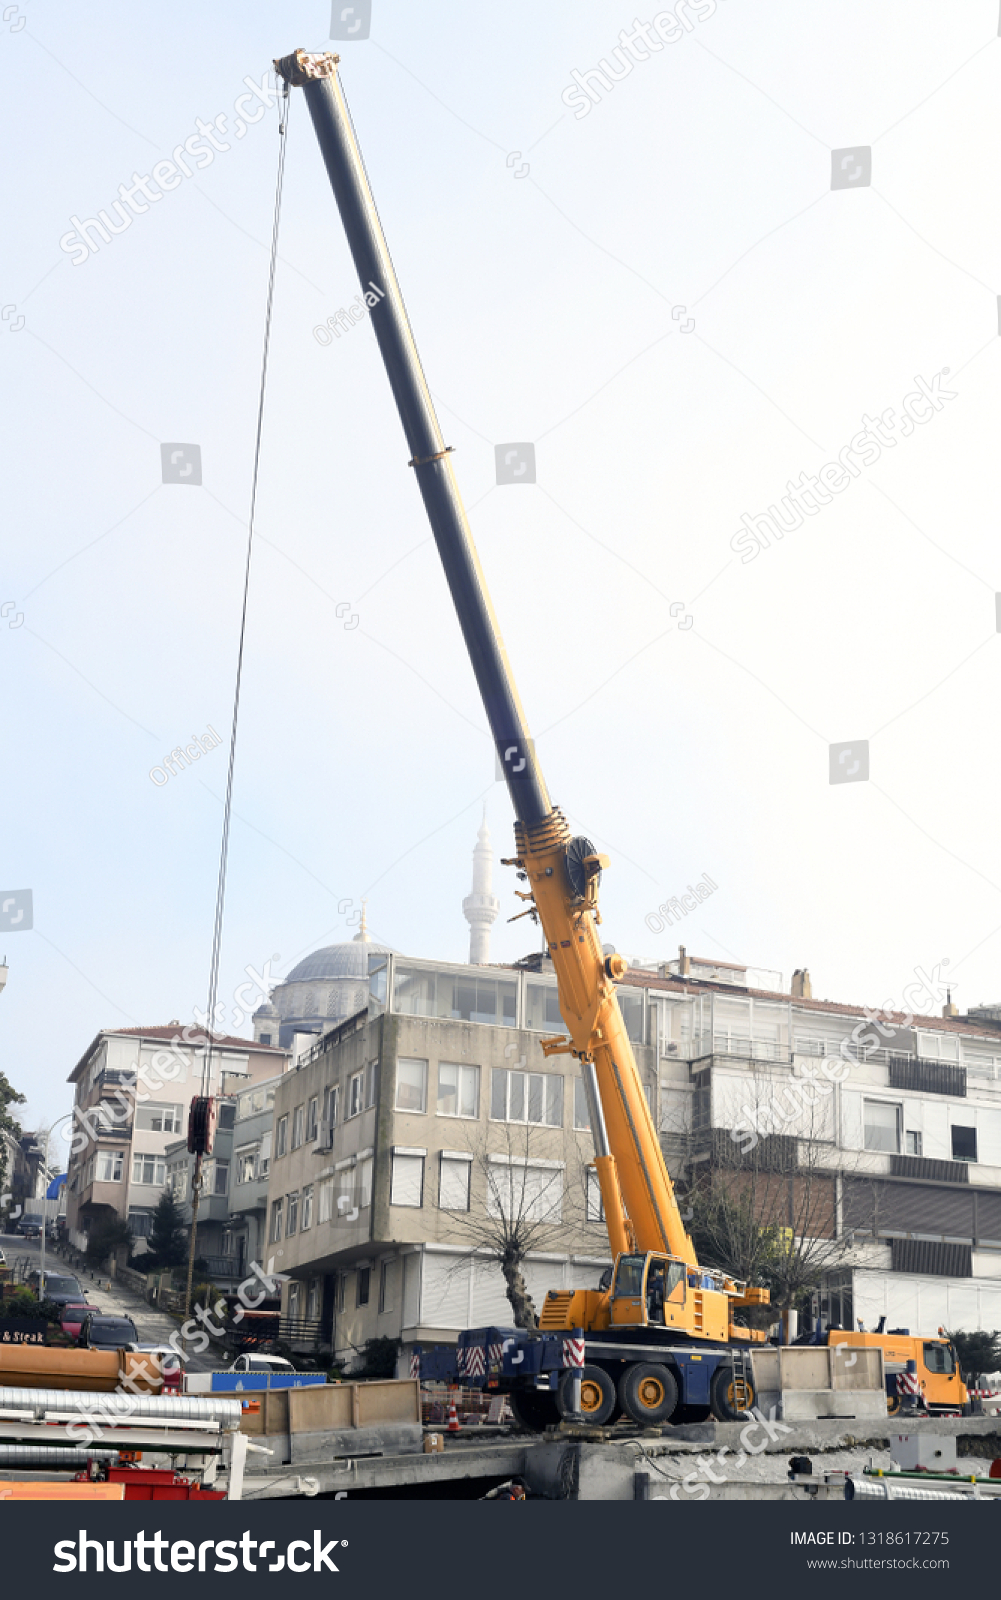 Turkey, istanbul, February 20, 2019: Mobile crane with its boom risen outdoors #1318617275